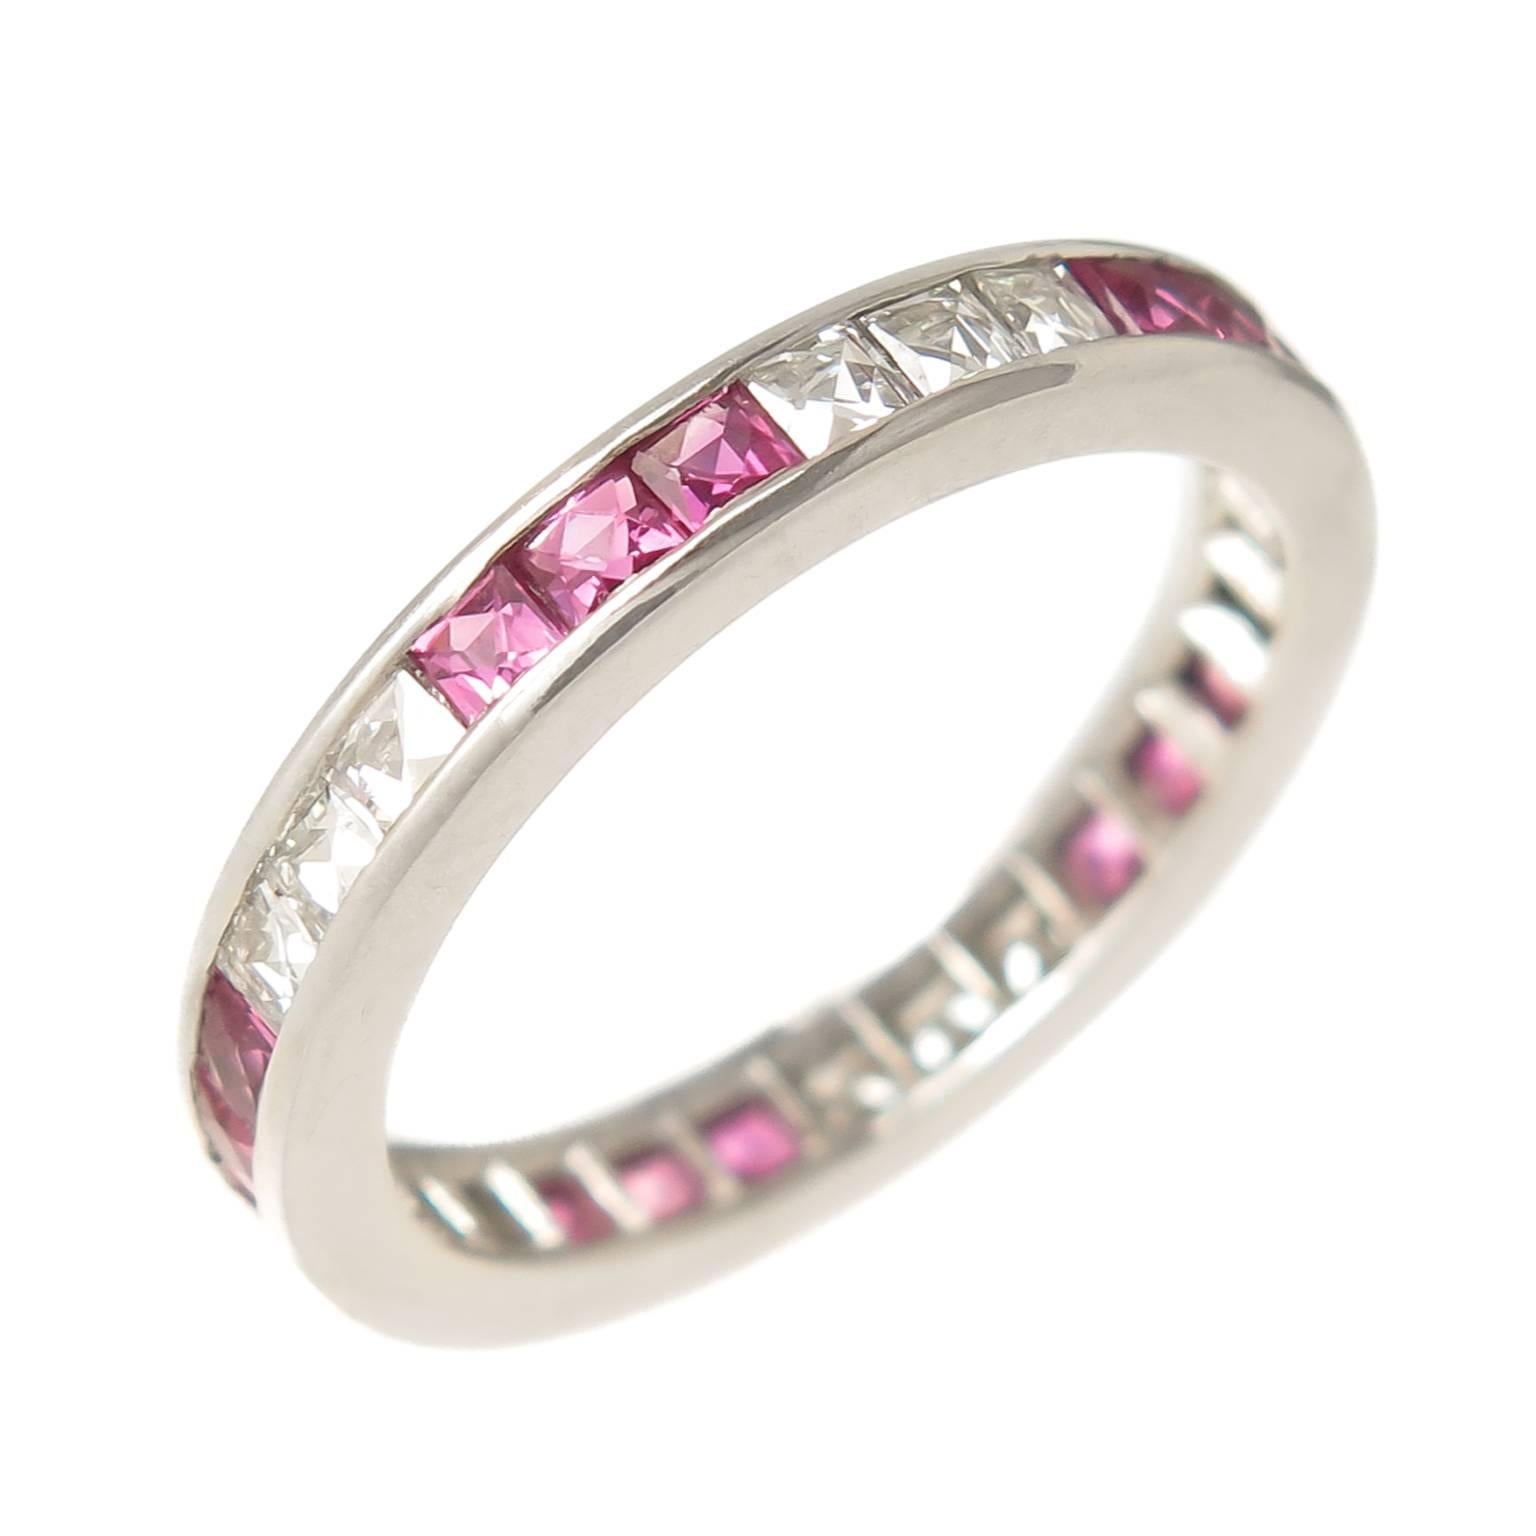 French Cut Diamonds and French Cut Rubies eternity, Band Ring set in Platinum, measuring 2.5 MM wide and set with 1/2 Carat of Diamonds and 1/2 carat of Rubies, finger size = 5